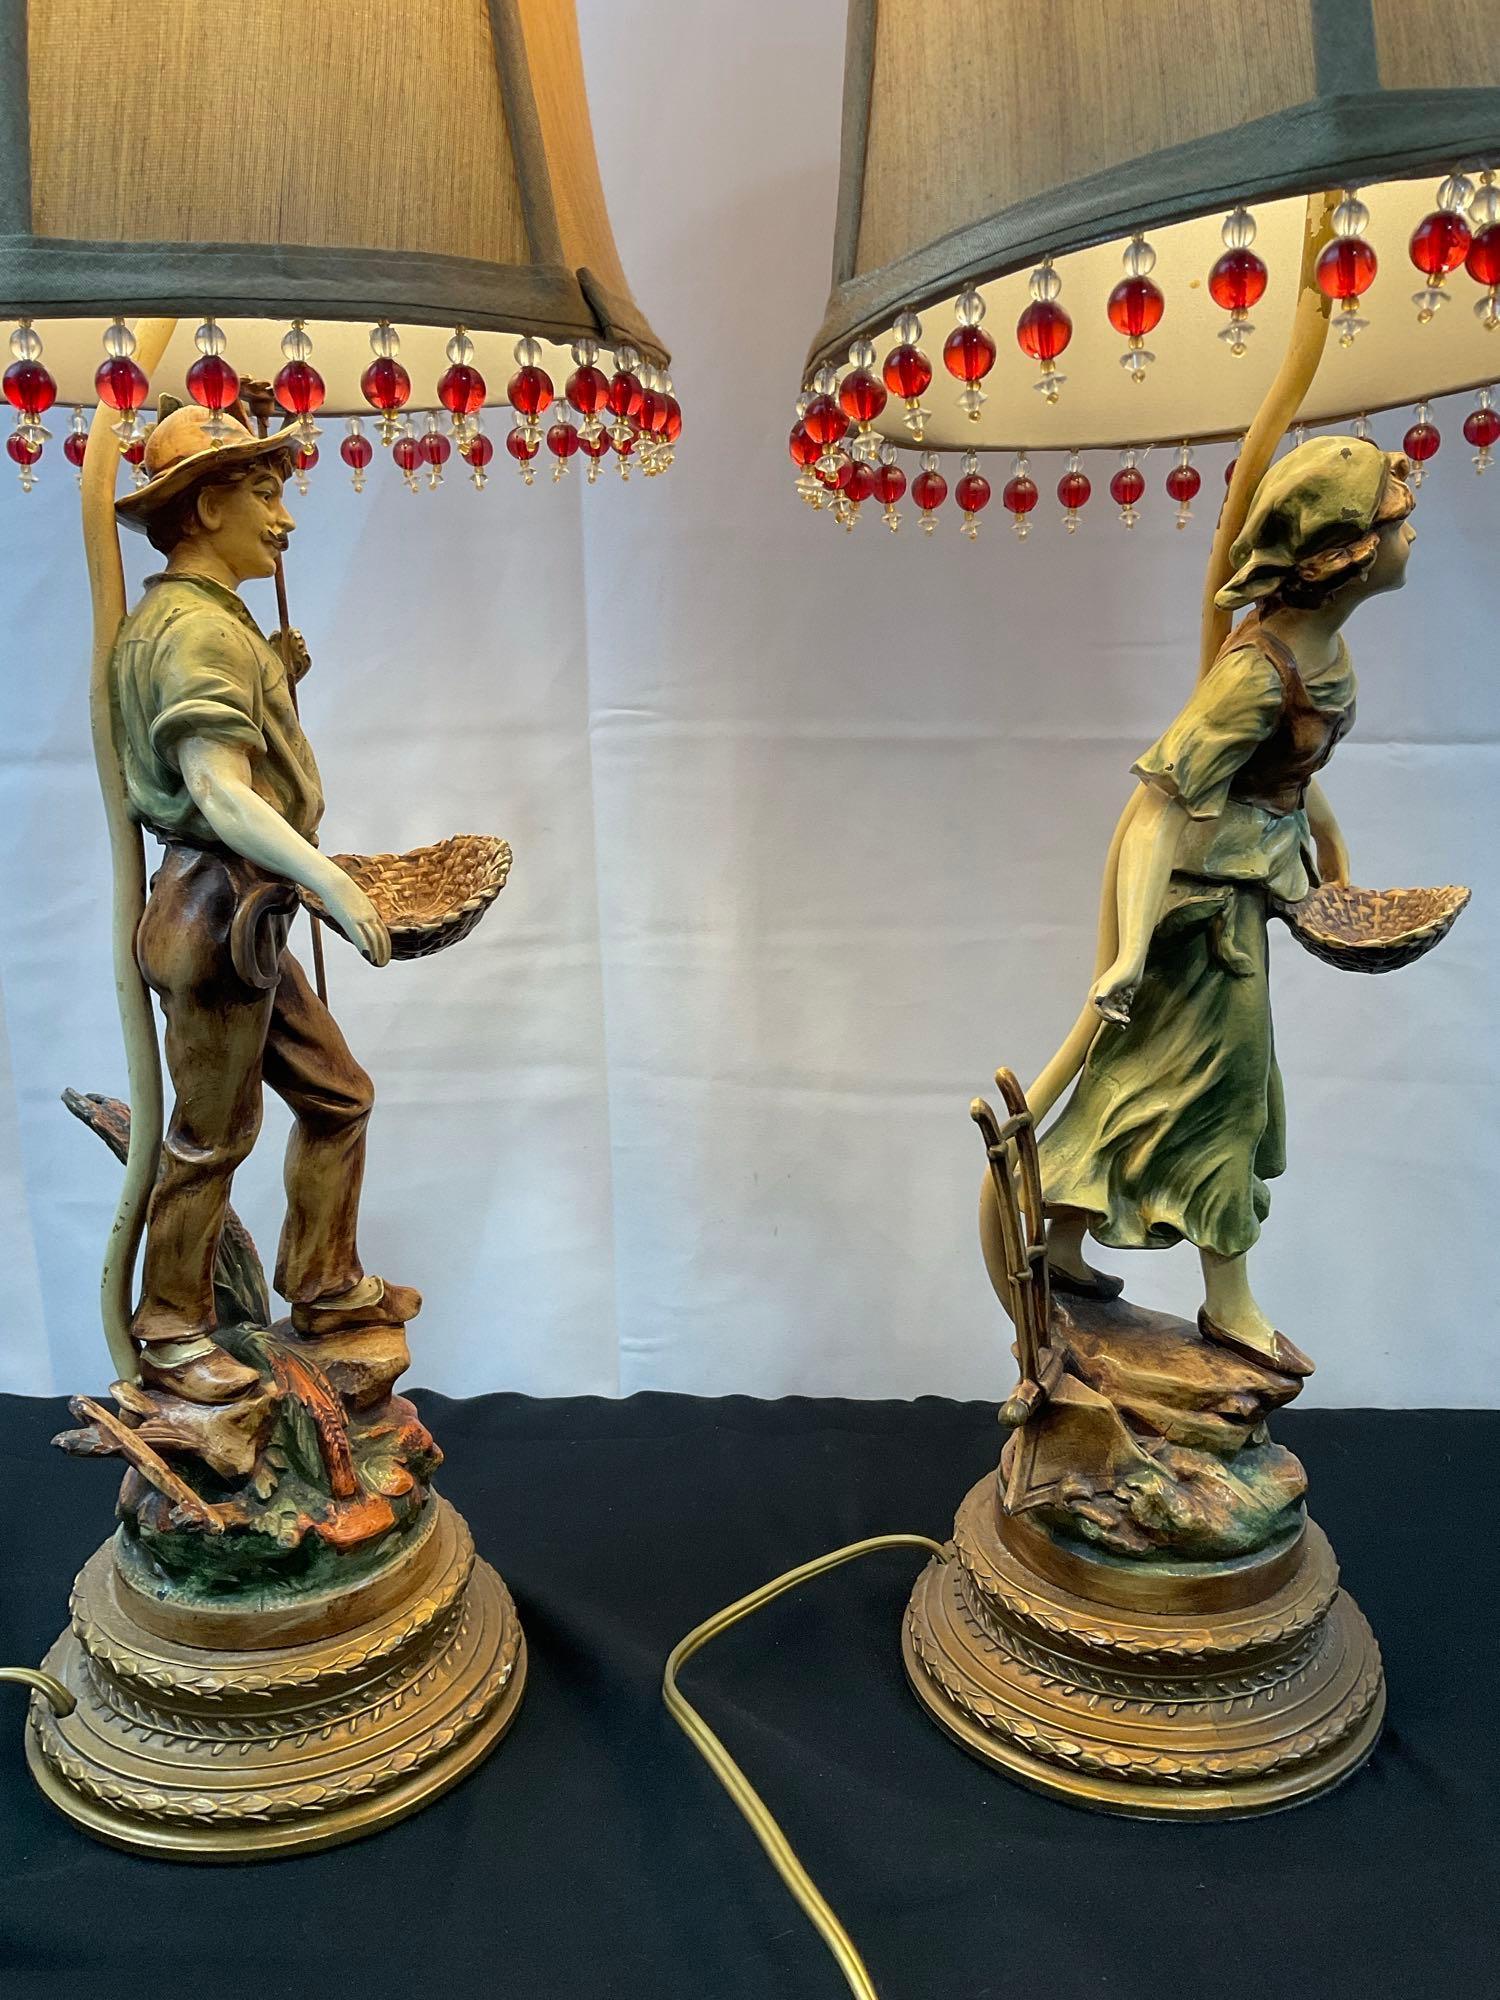 Pair of Figural Handpainted Cast Metal Lamps, Possibly L&F Moreau, Tested and working